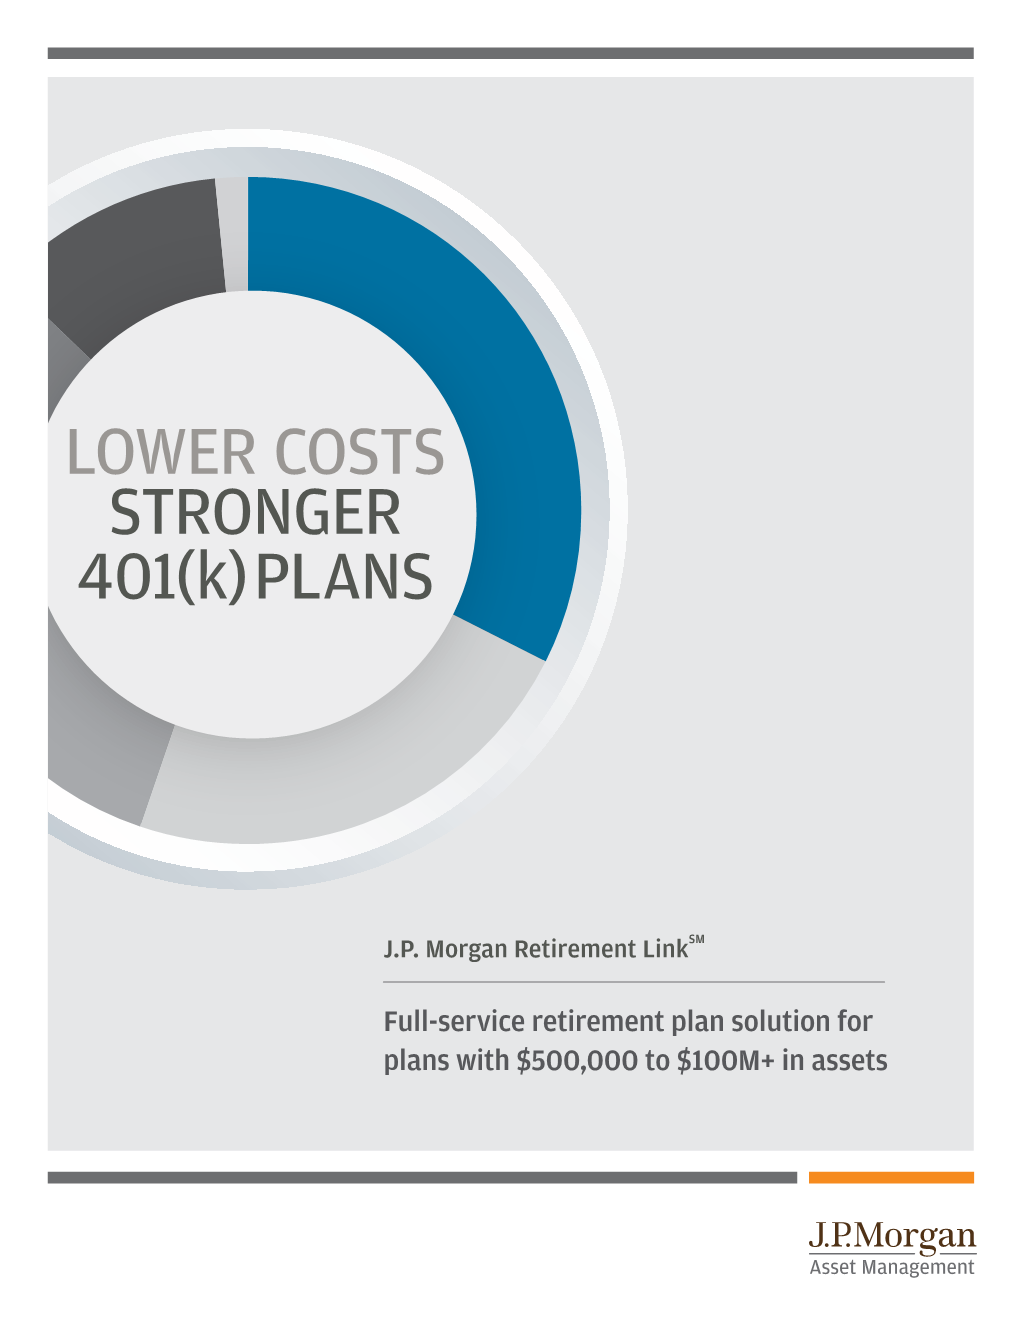 LOWER COSTS STRONGER 401(K) PLANS